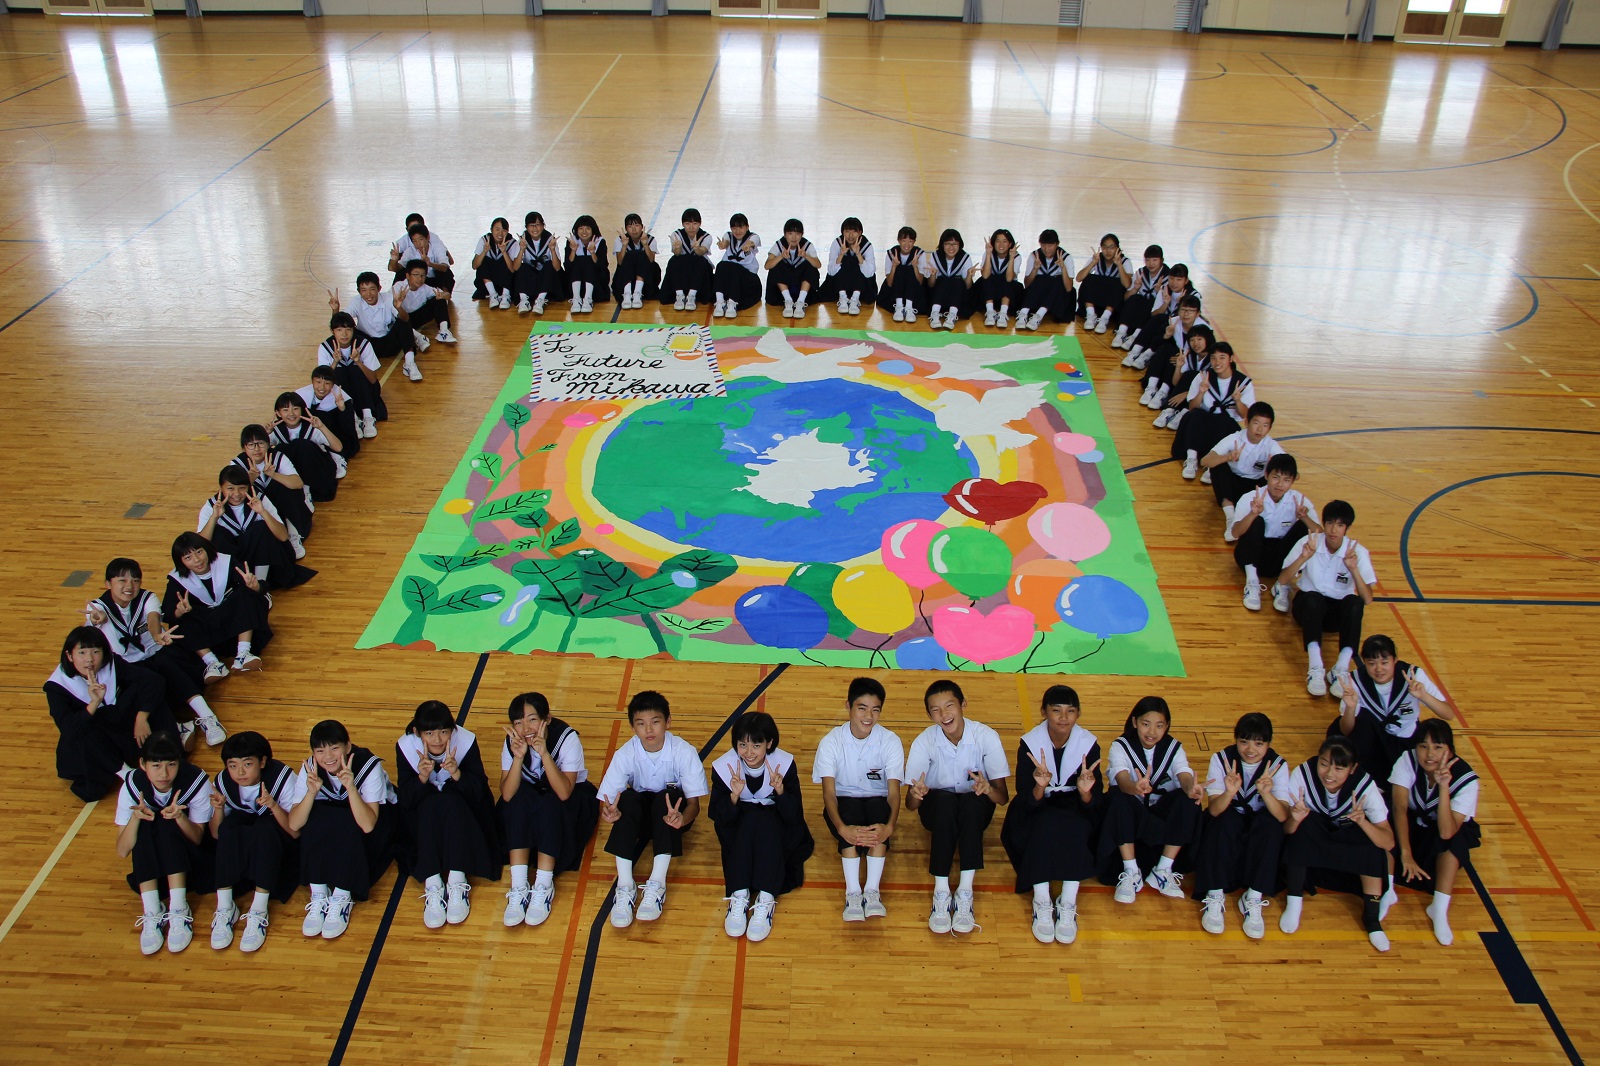 The Biggest Painting in the World 2020 Okazaki City was completed